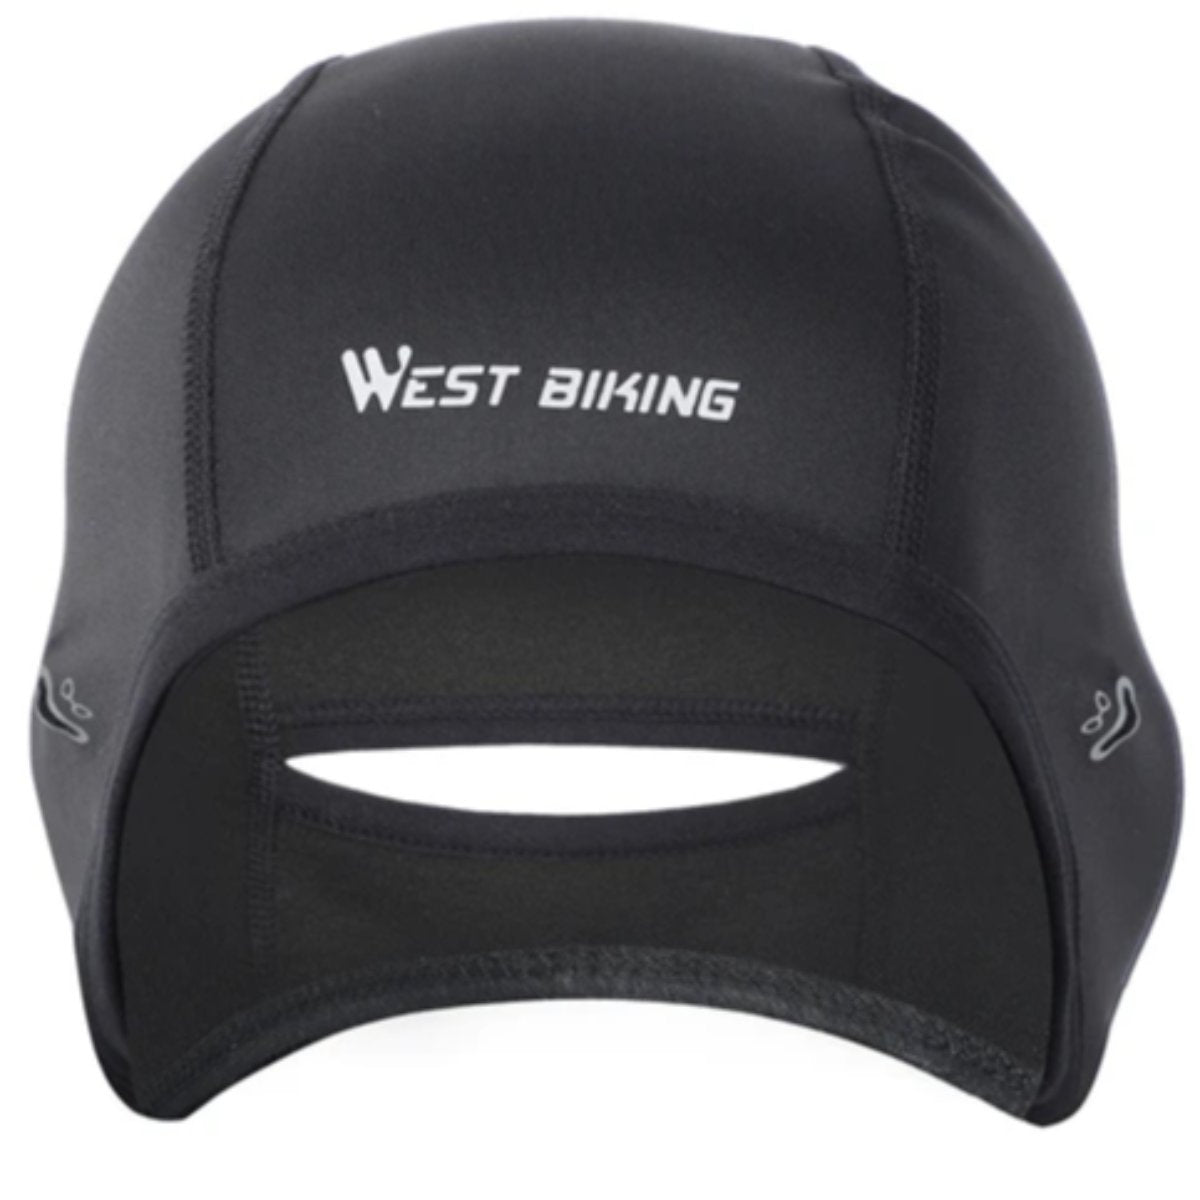 A black Motorcycle Helmet Liner Cap with the keywords "west biking" on it, designed to wick away sweat and provide cooling.